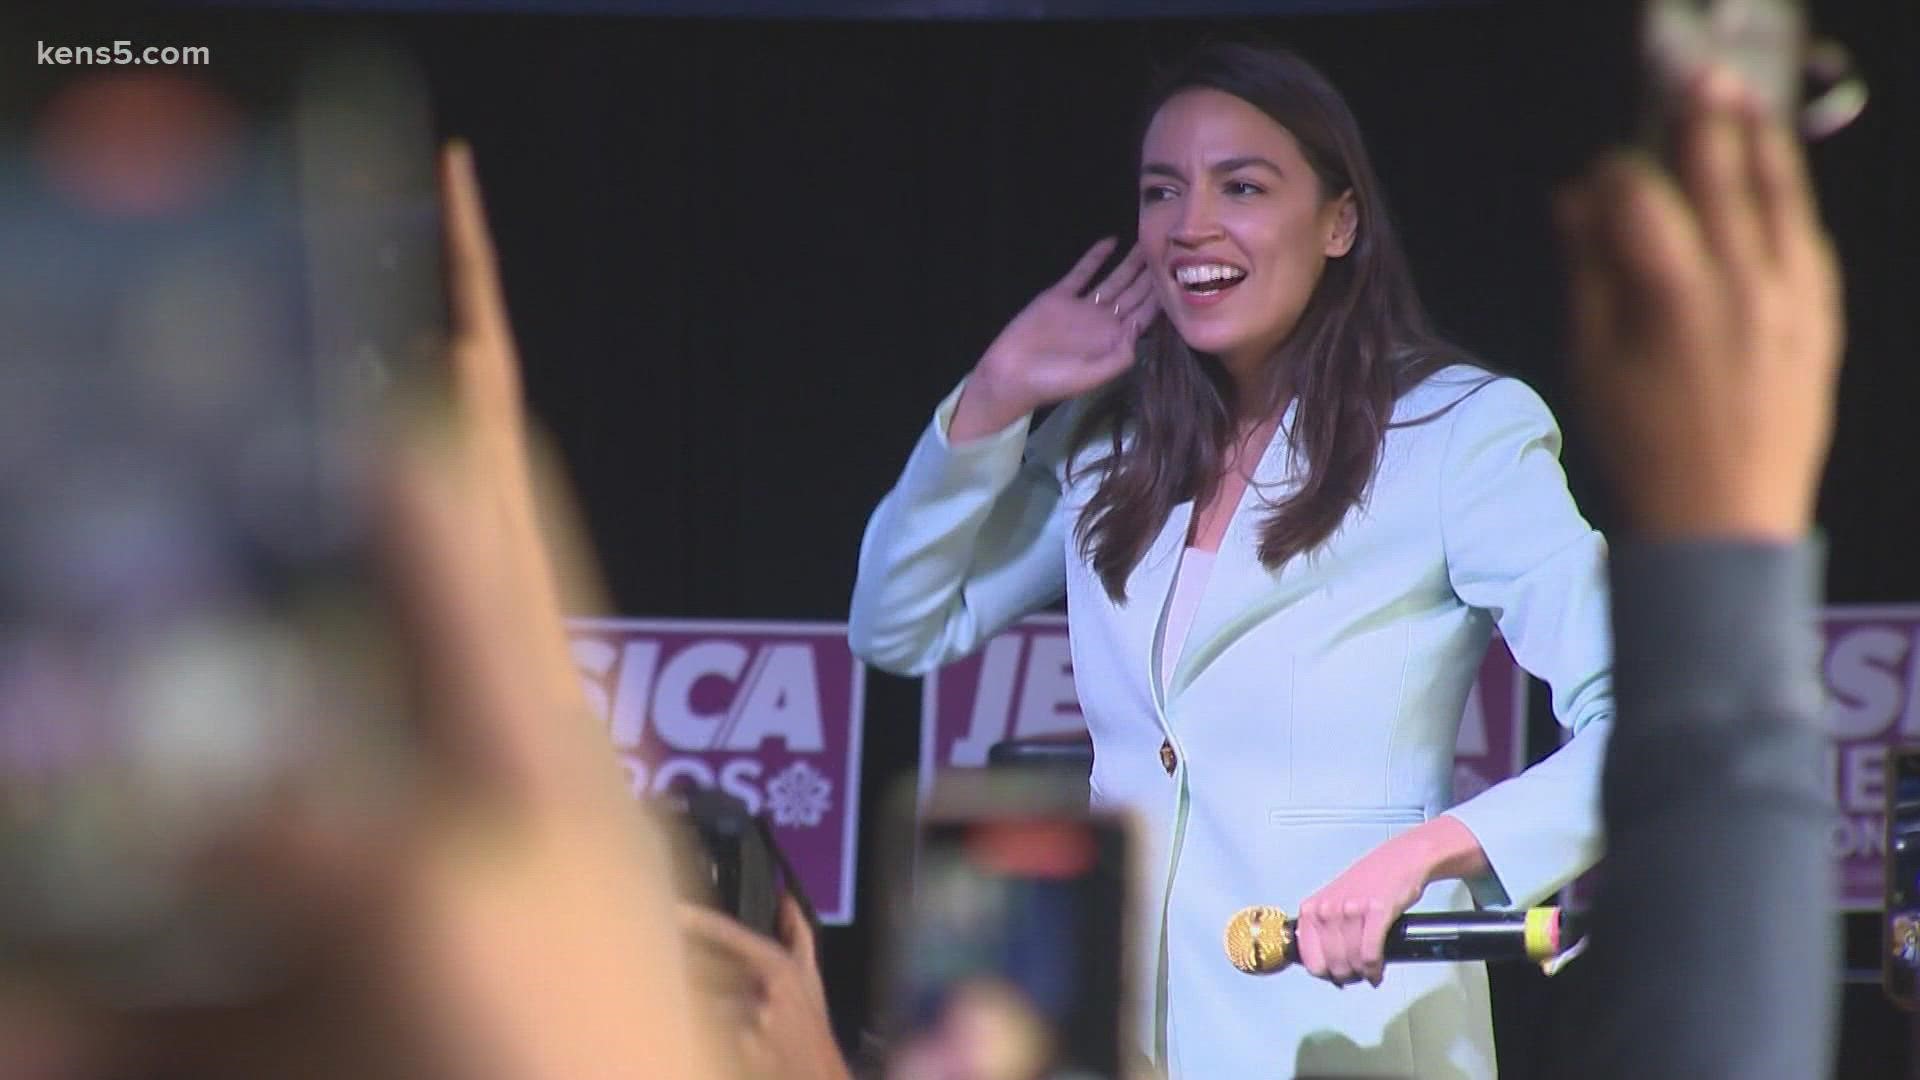 The well-known New York congresswoman supported U.S. House candidates Greg Casar and Jessica Cisneros at a San Antonio rally ahead of their primary races.